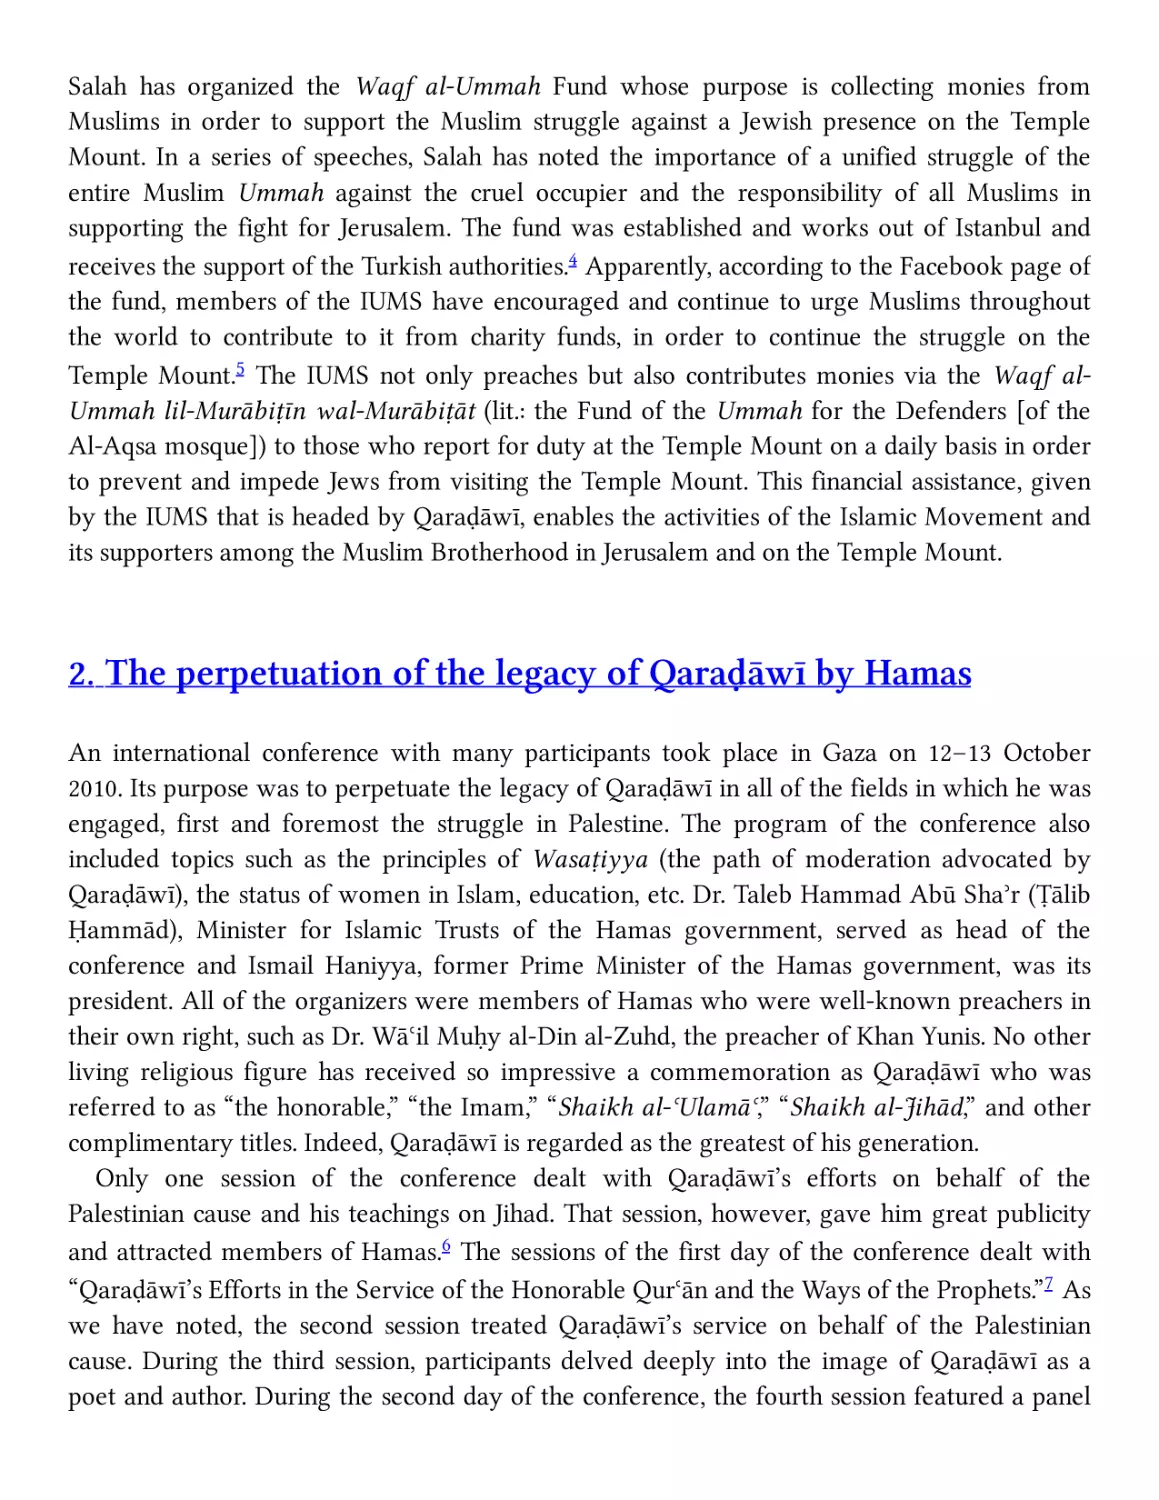 2. The perpetuation of the legacy of QaraḊāwī by Hamas